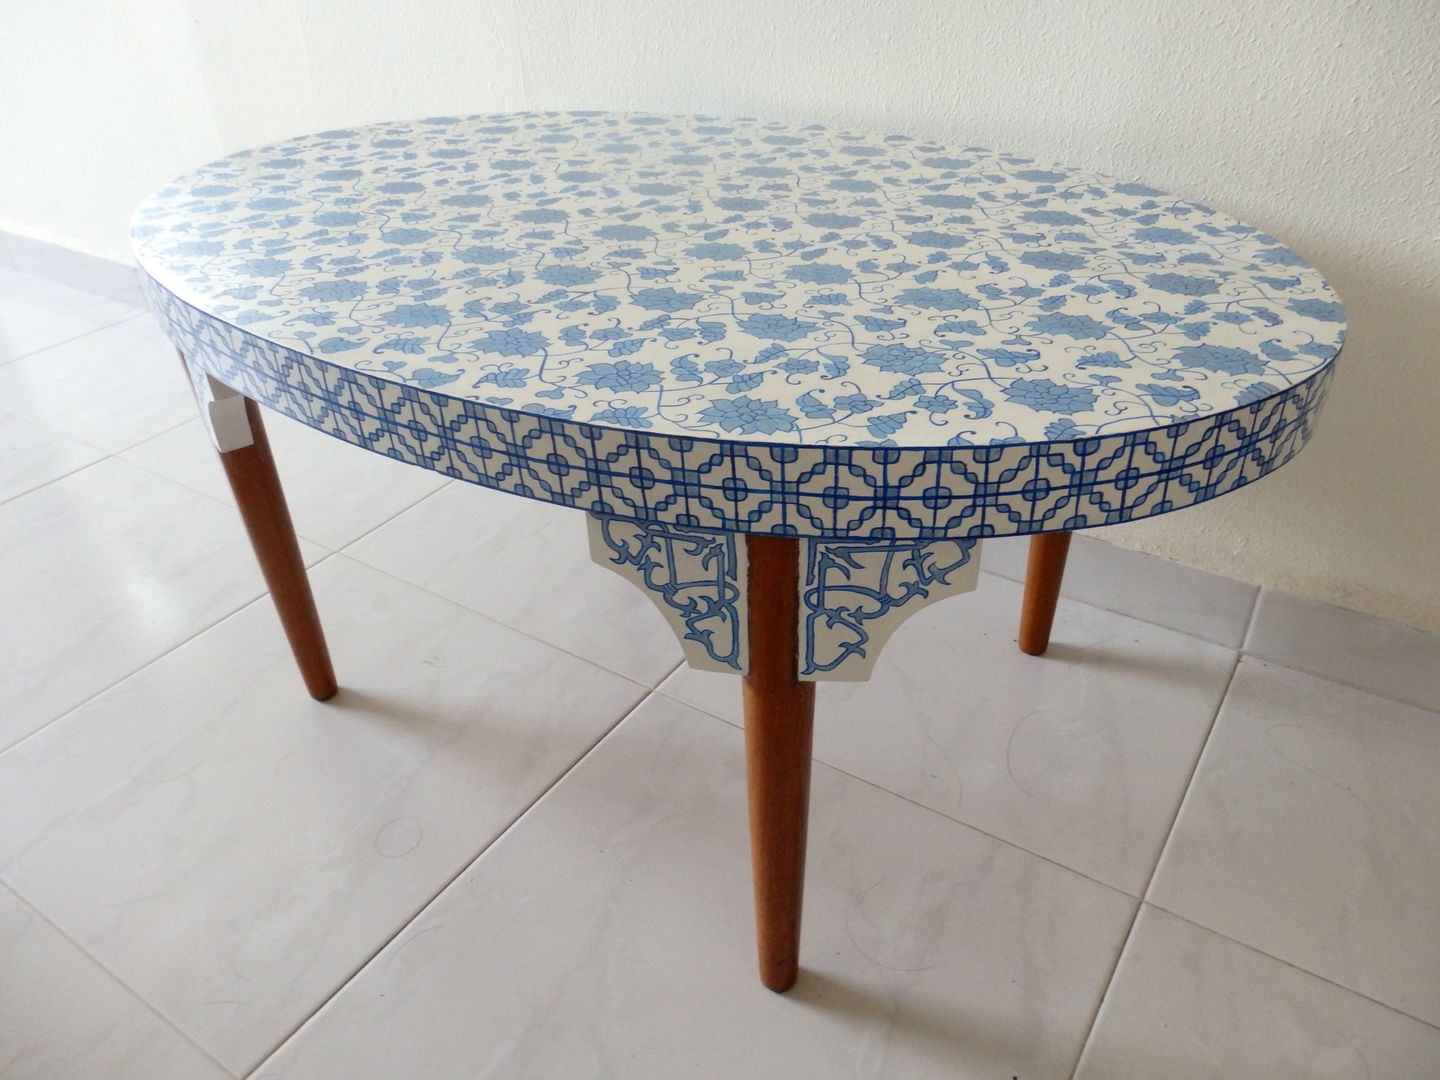 Porcelain coffee table, Art From Junk Pte Ltd Art From Junk Pte Ltd